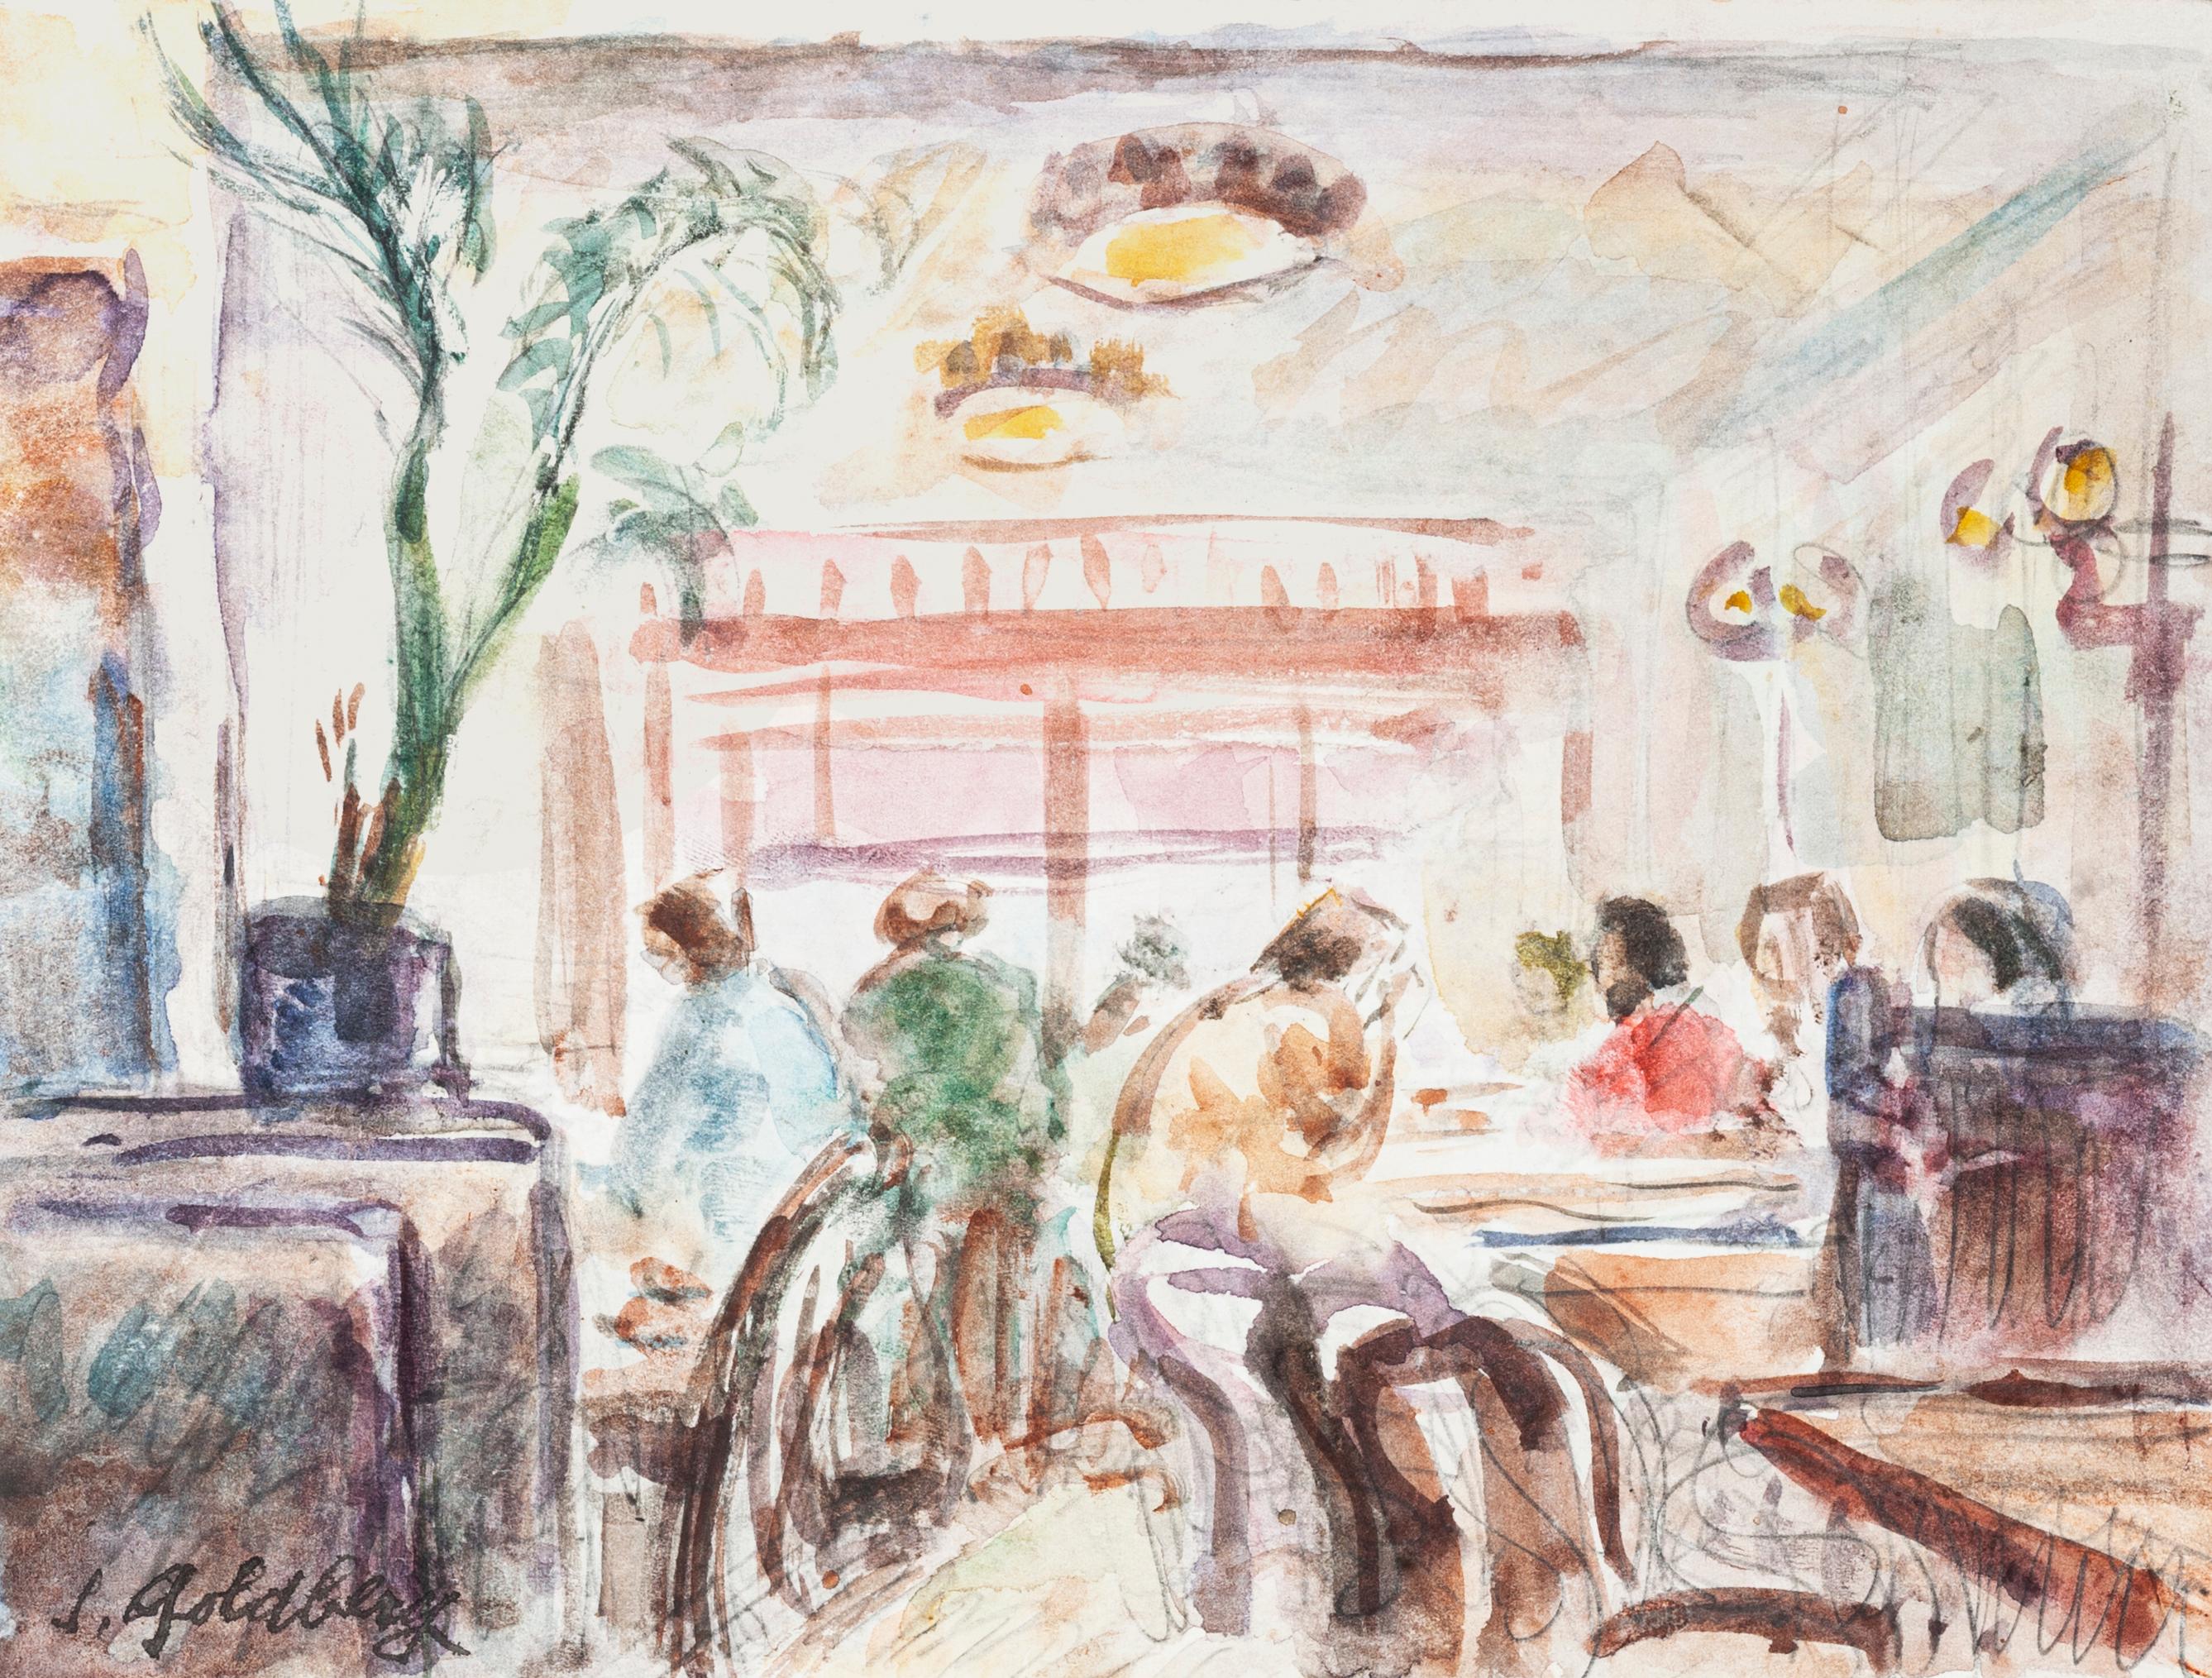 In the Café - Original Pencil and Watercolor by S. Goldberg - Mid 20th Century